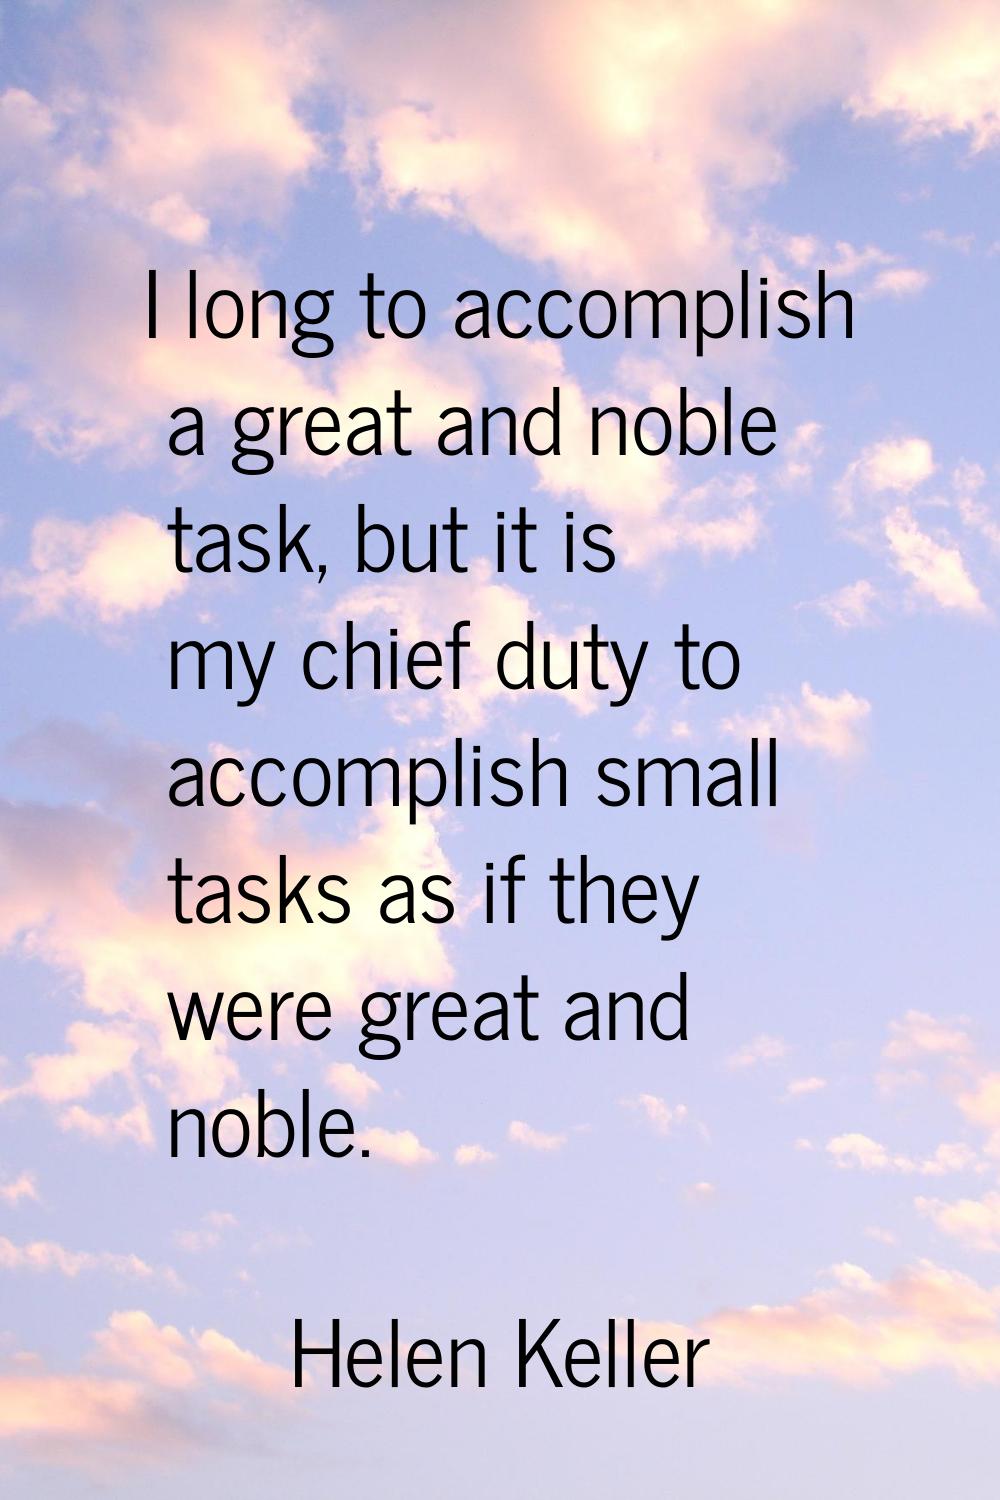 I long to accomplish a great and noble task, but it is my chief duty to accomplish small tasks as i